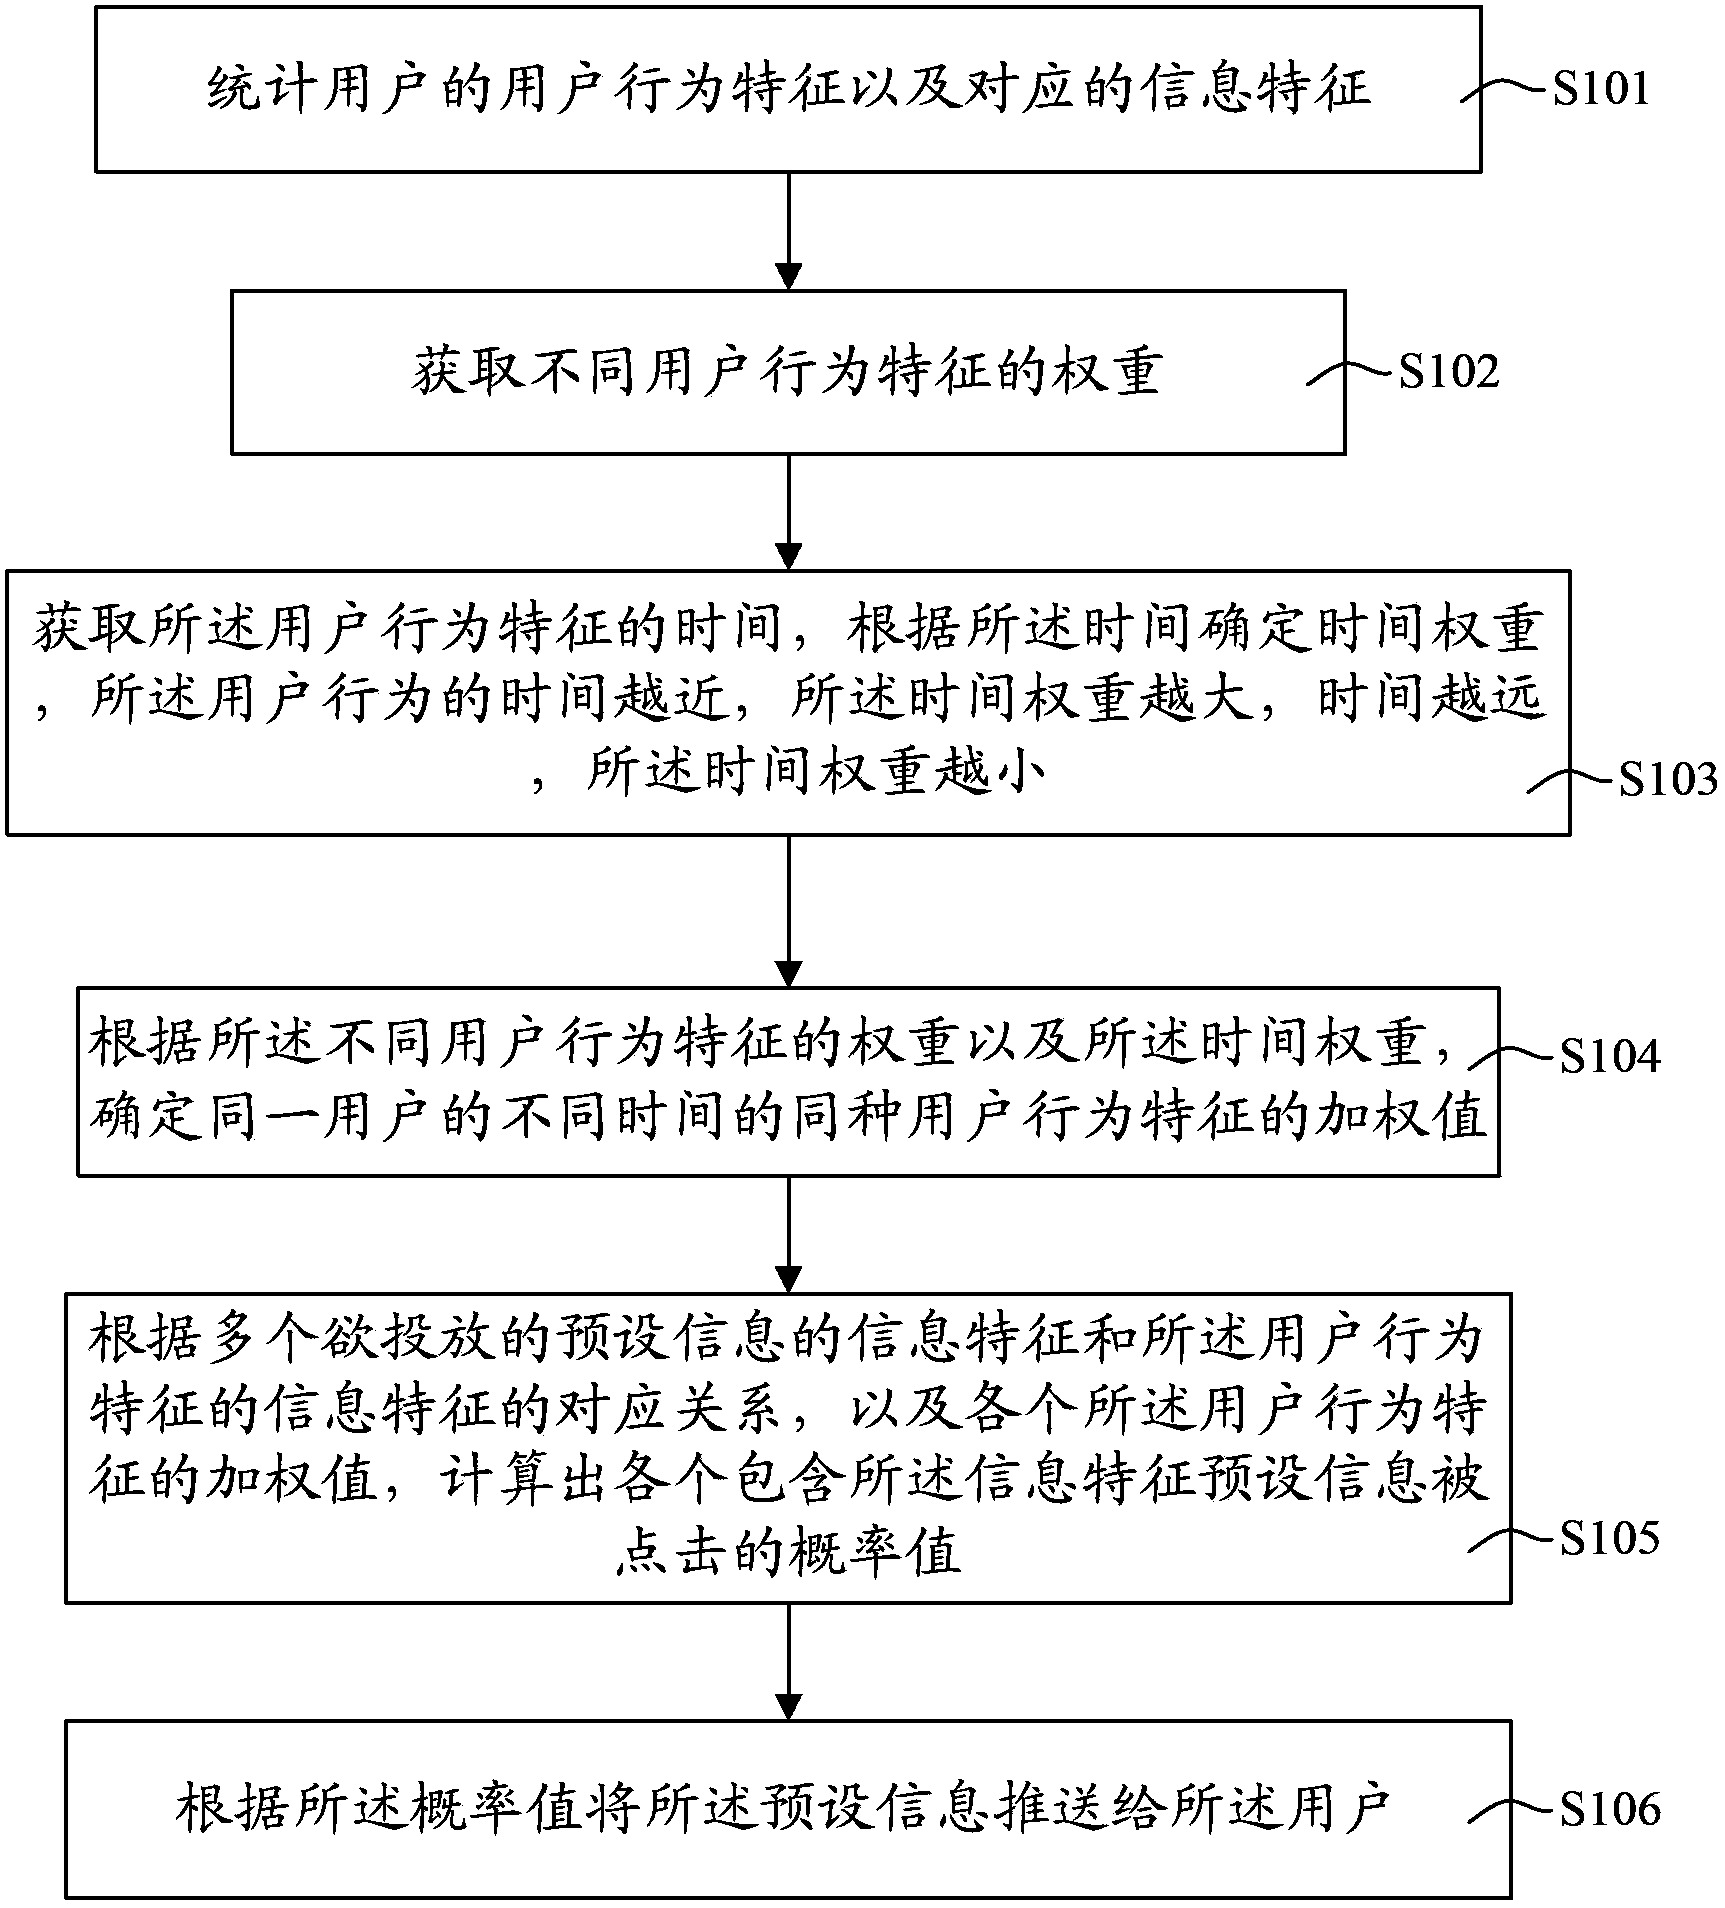 Method and system for information releasing